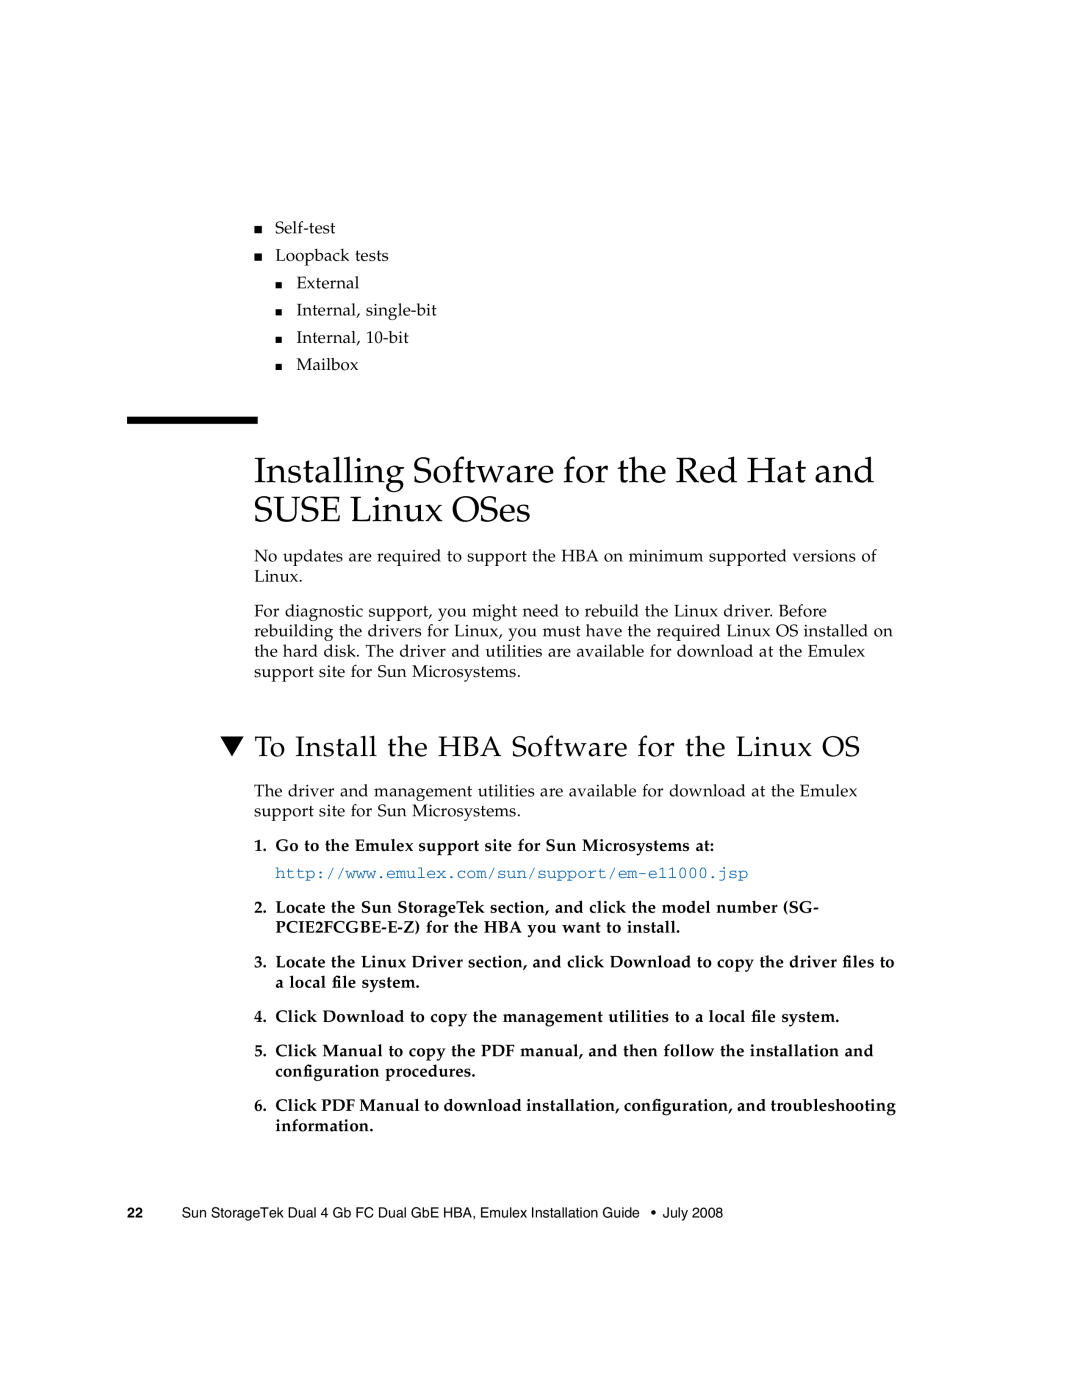 Sun Microsystems SG-XPCIE2FCGBE-E-Z manual Installing Software for the Red Hat and SUSE Linux OSes 